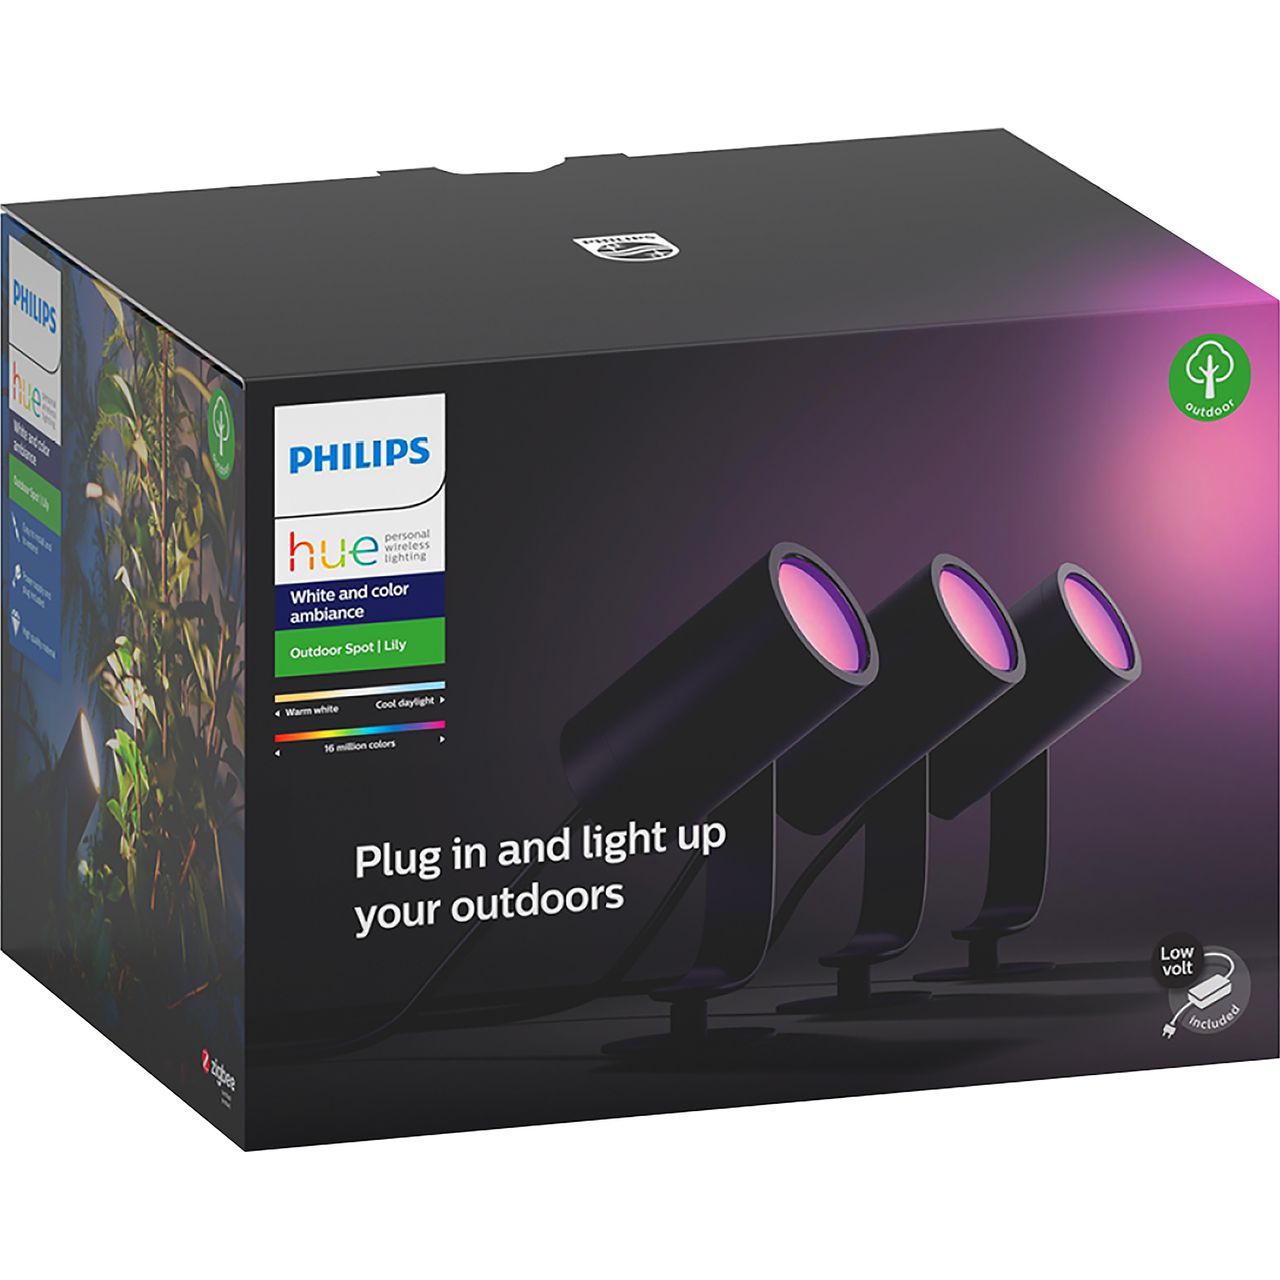 Philips Hue White & Colour Ambiance Lily Outdoor Spot Light Review